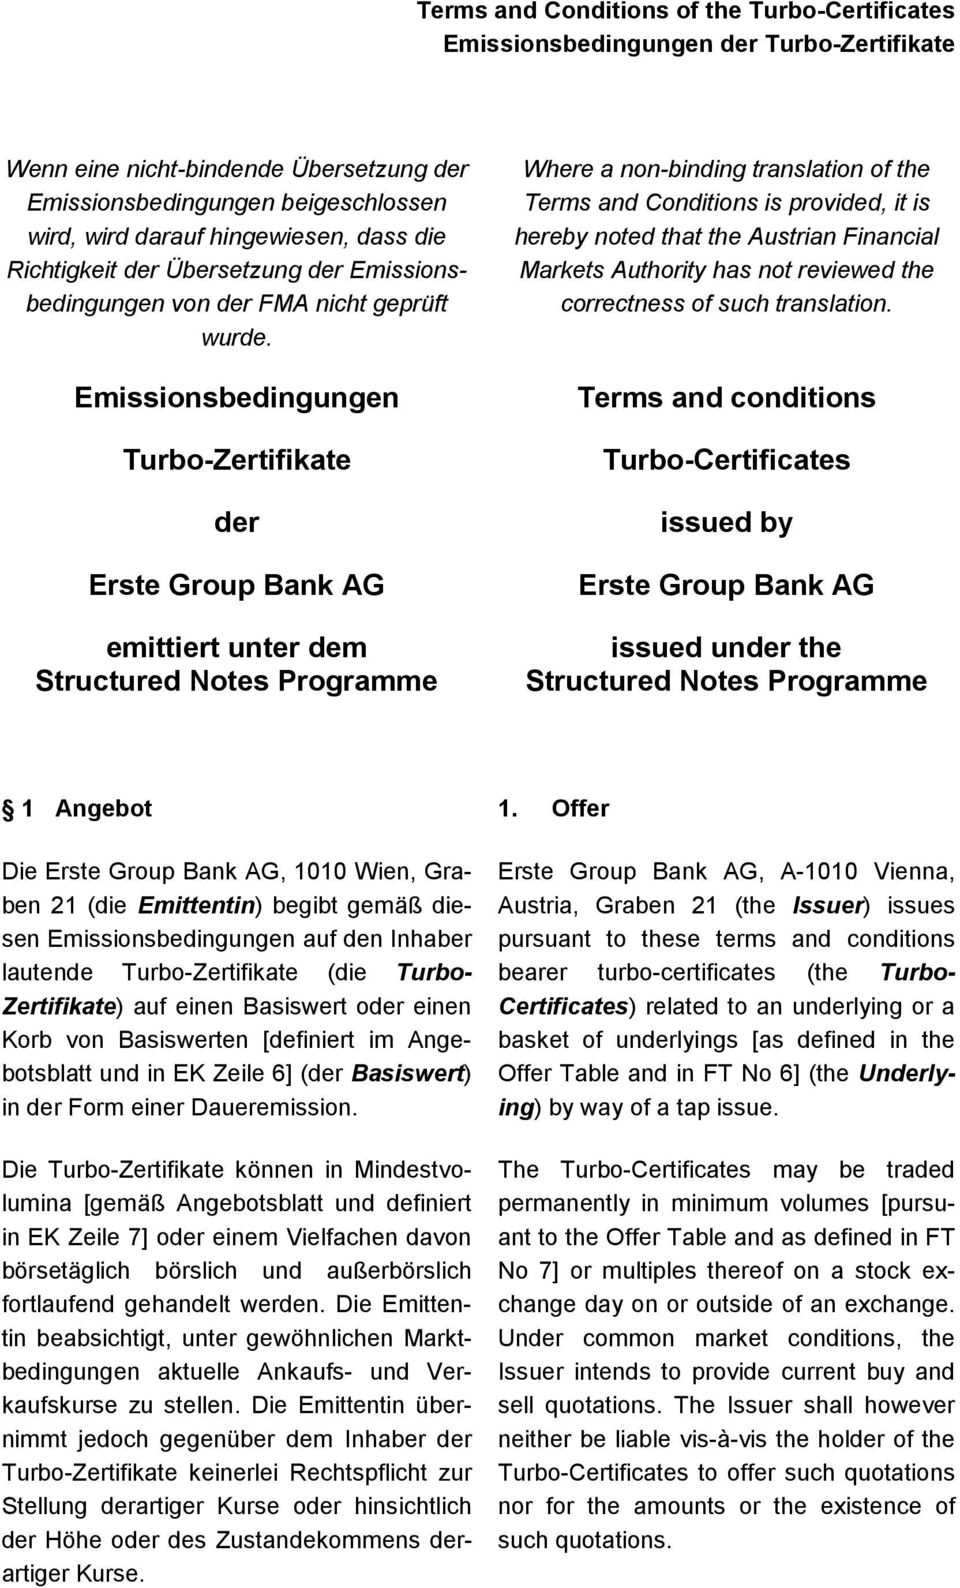 Emissionsbedingungen Turbo-Zertifikate der Erste Group Bank AG emittiert unter dem Structured Notes Programme Where a non-binding translation of the Terms and Conditions is provided, it is hereby